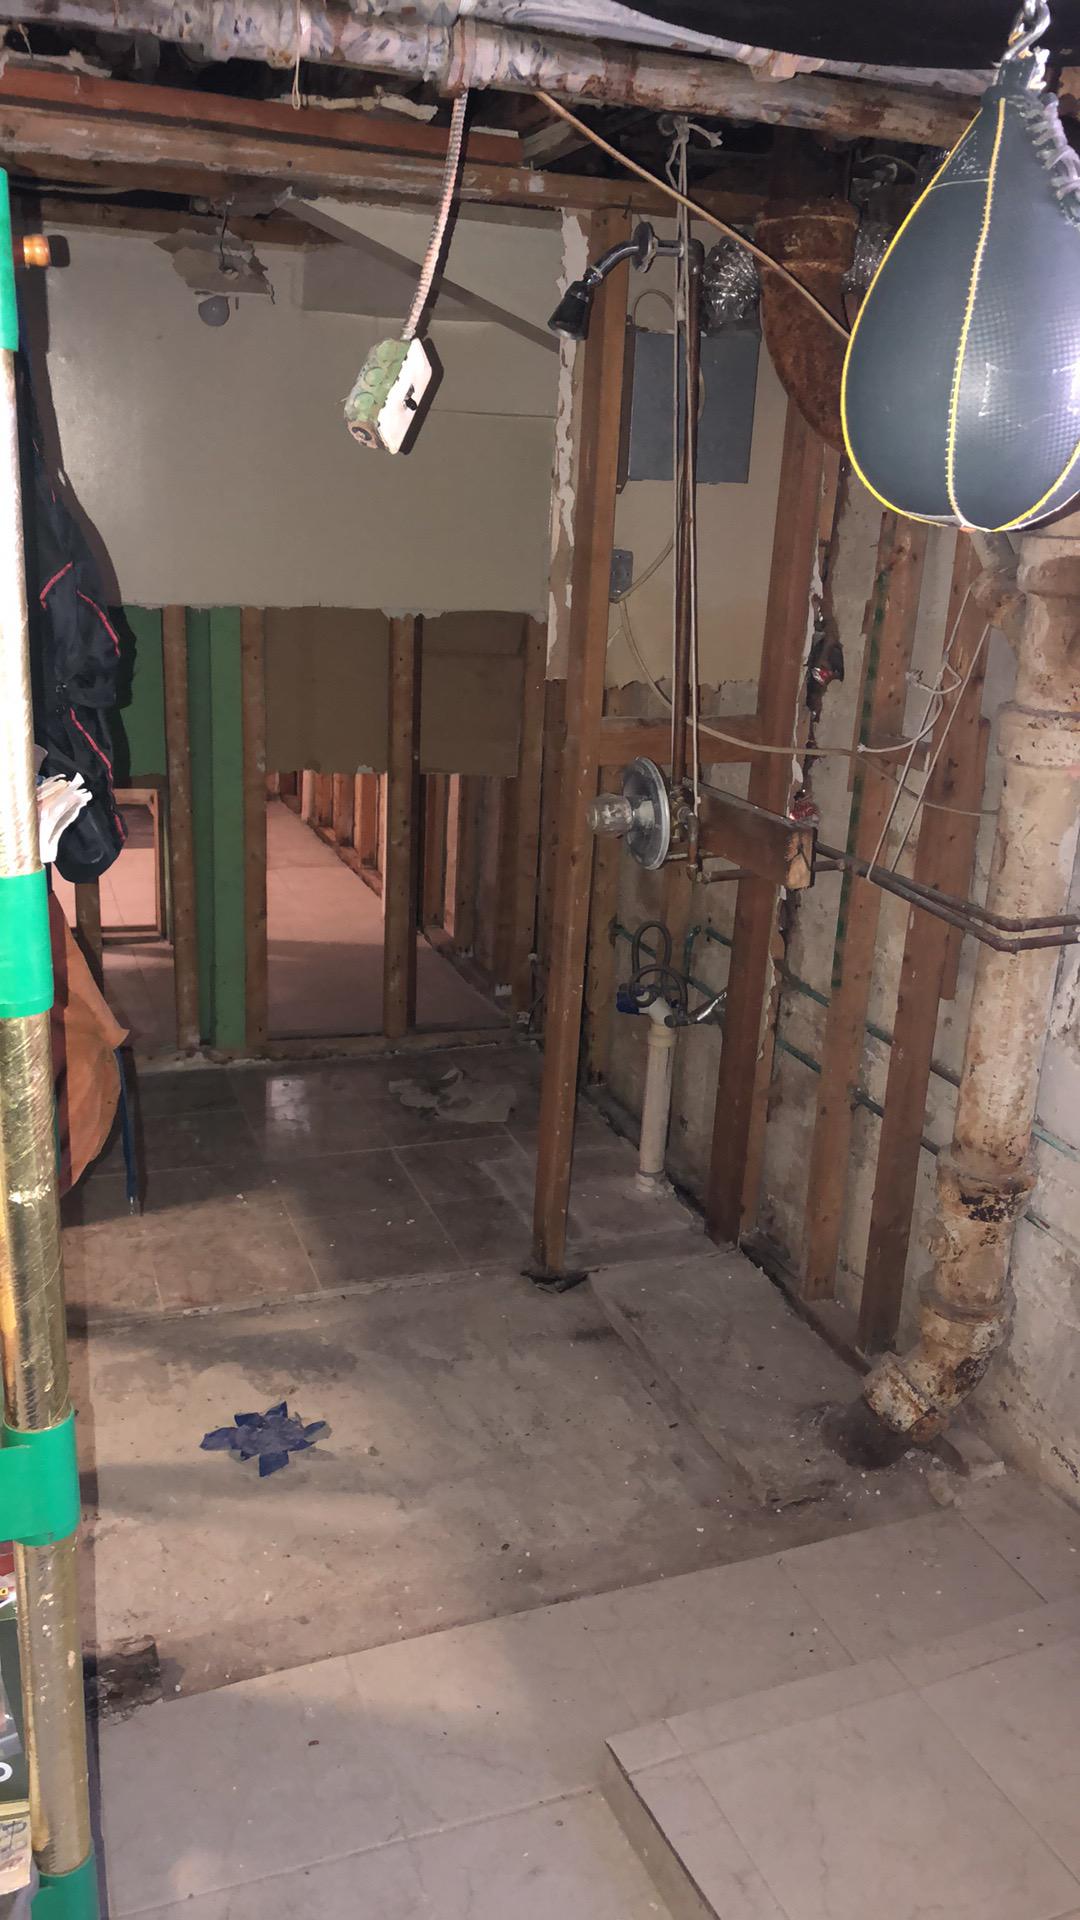 Affected materials in basement laundry room removed